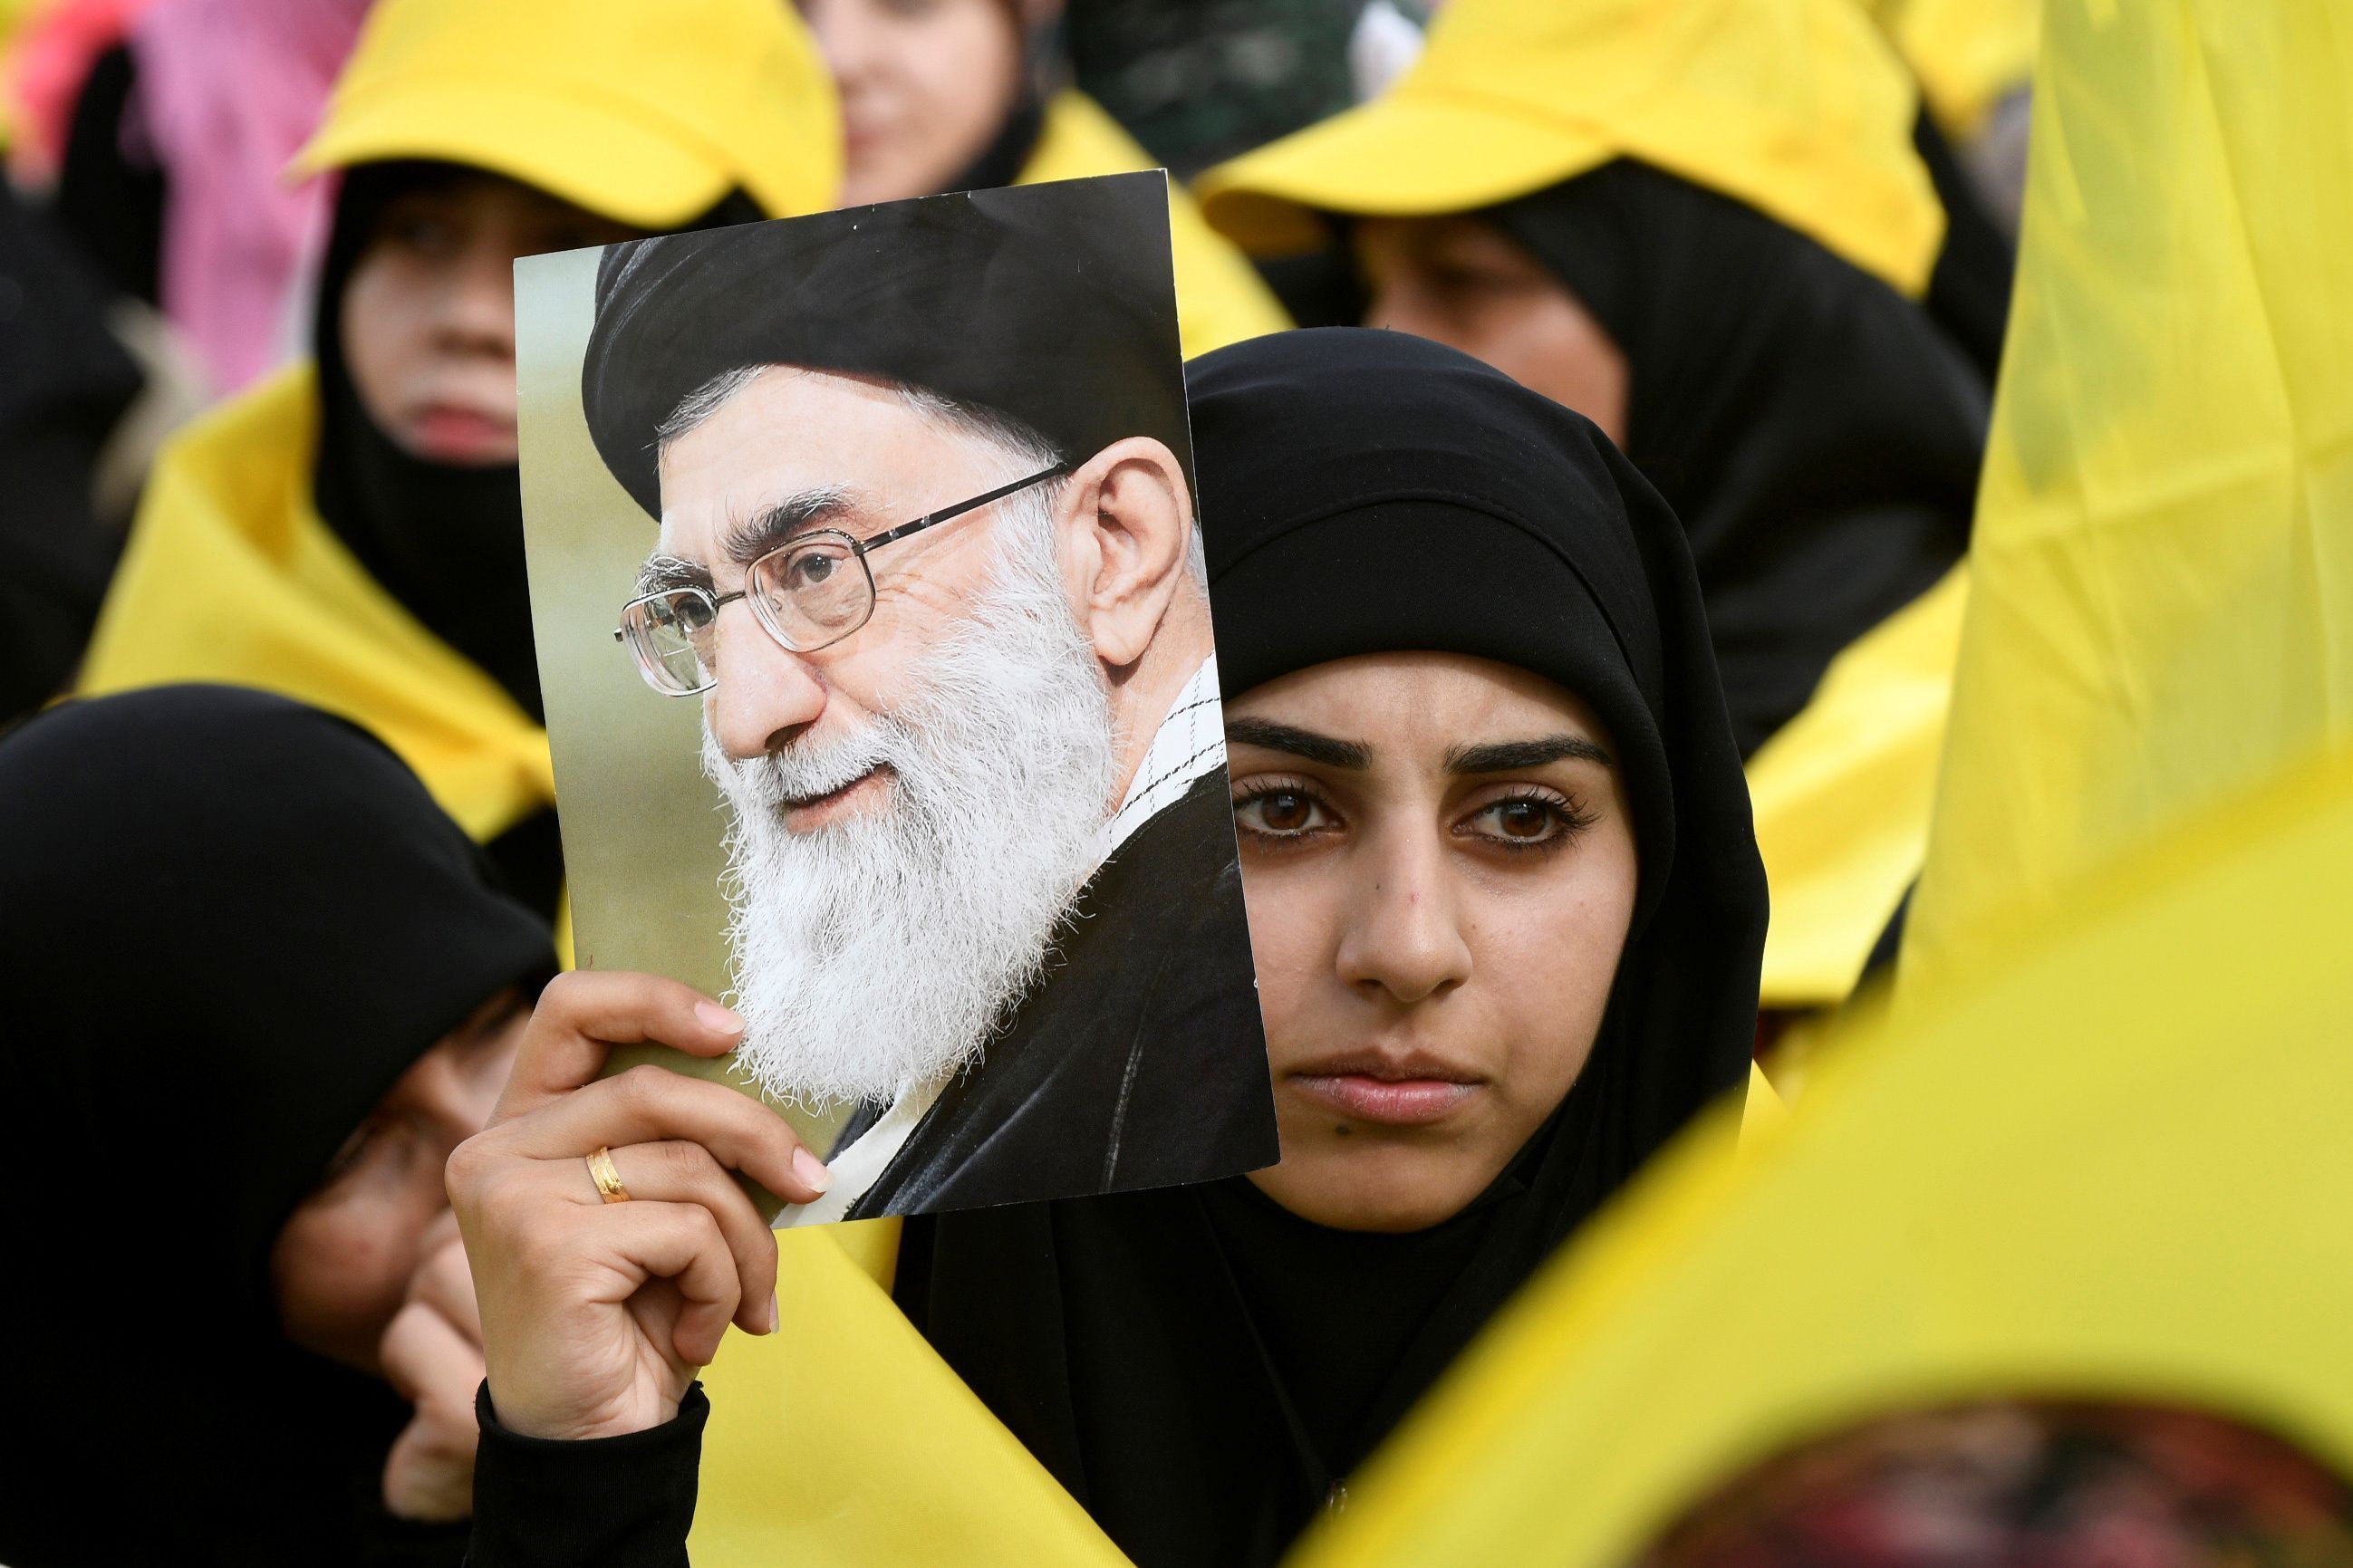 2017-05-25T170532Z_406012479_RC1857A890A0_RTRMADP_3_MIDEAST-CRISIS-HEZBOLLAH